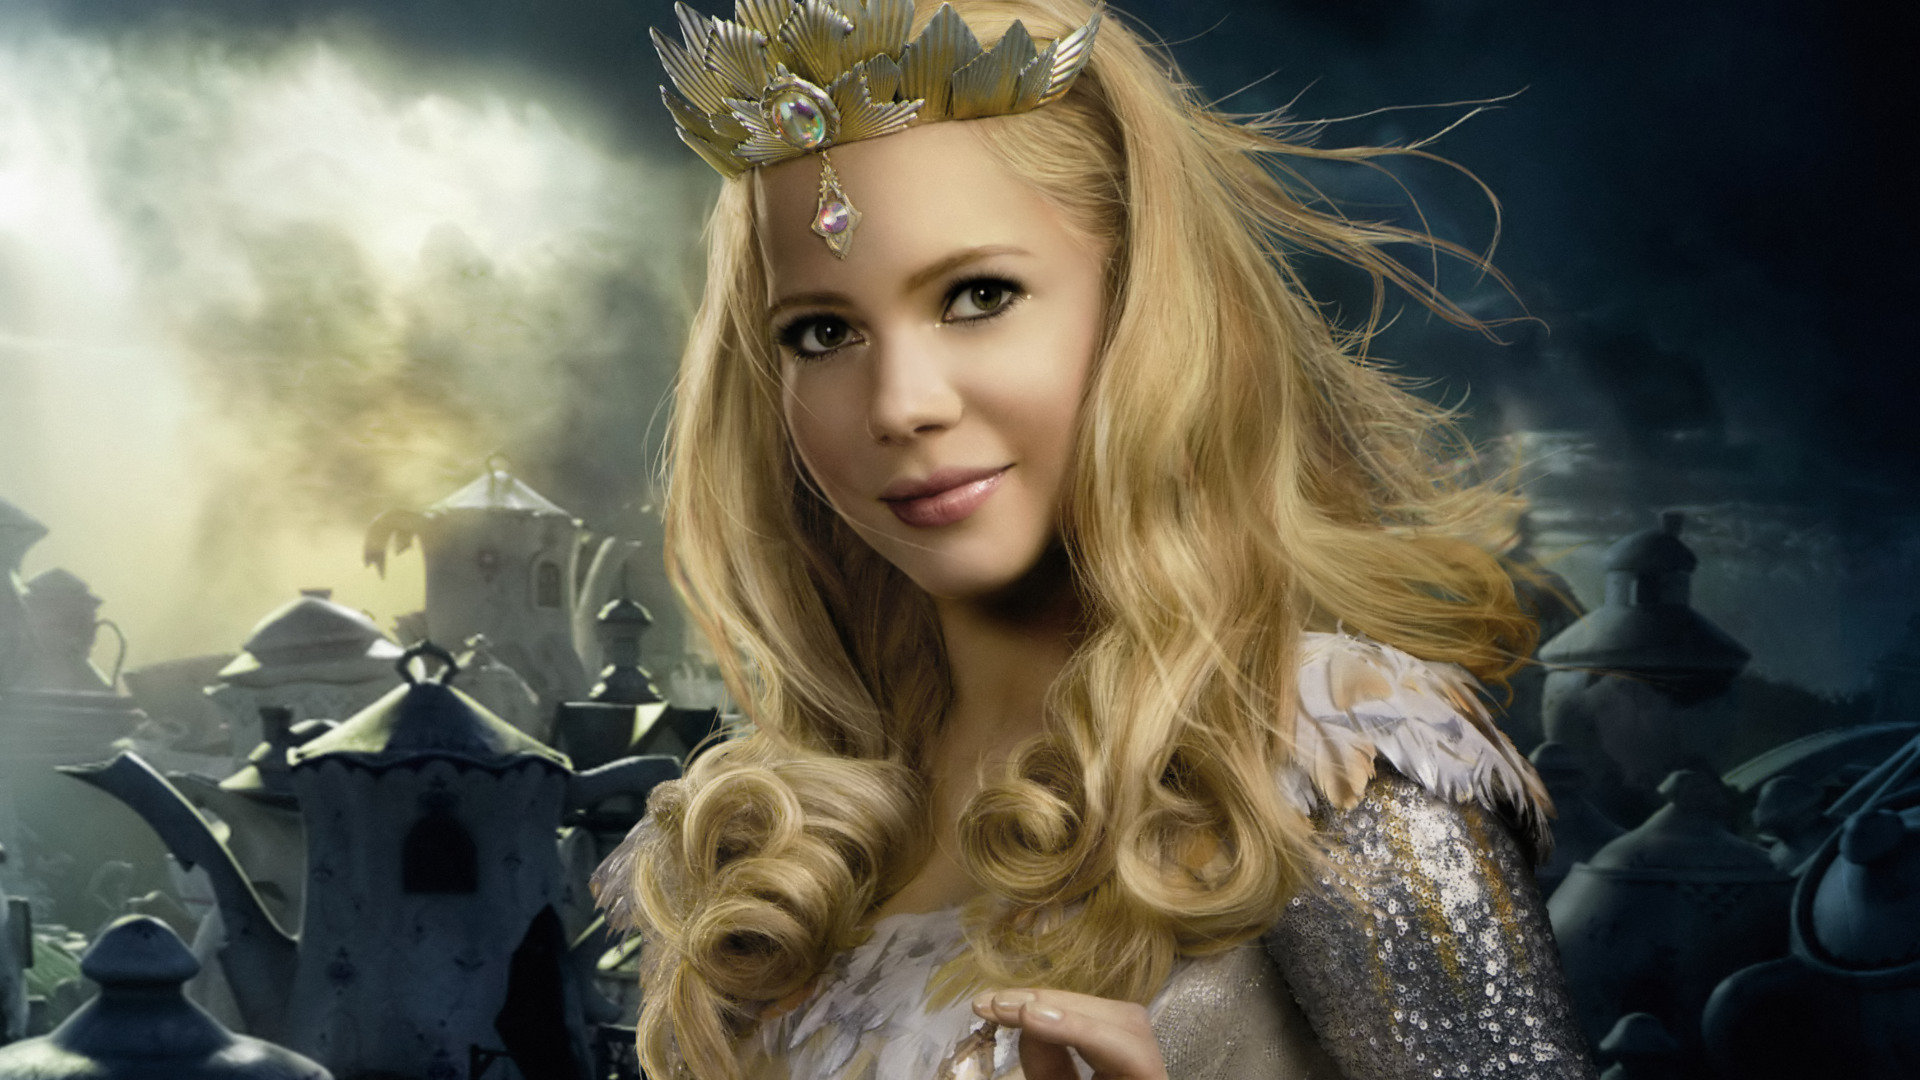 Oz The Great And Powerful Wallpapers 1920x1080 Full Hd 1080p Images, Photos, Reviews